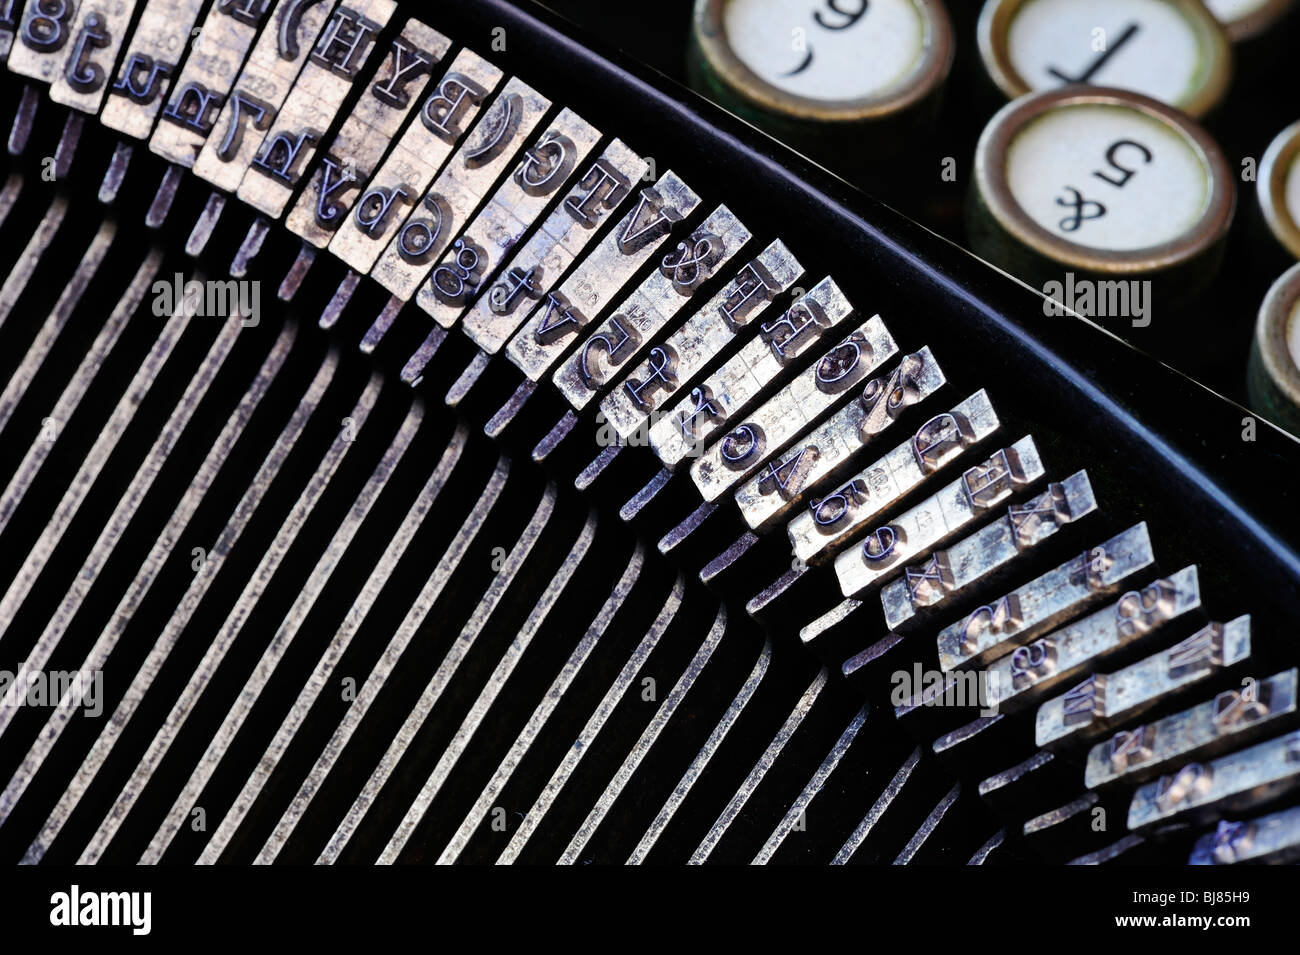 Close-up detail of the type of an old German, pre-war typewriter with the keys out of focus in the background. Stock Photo